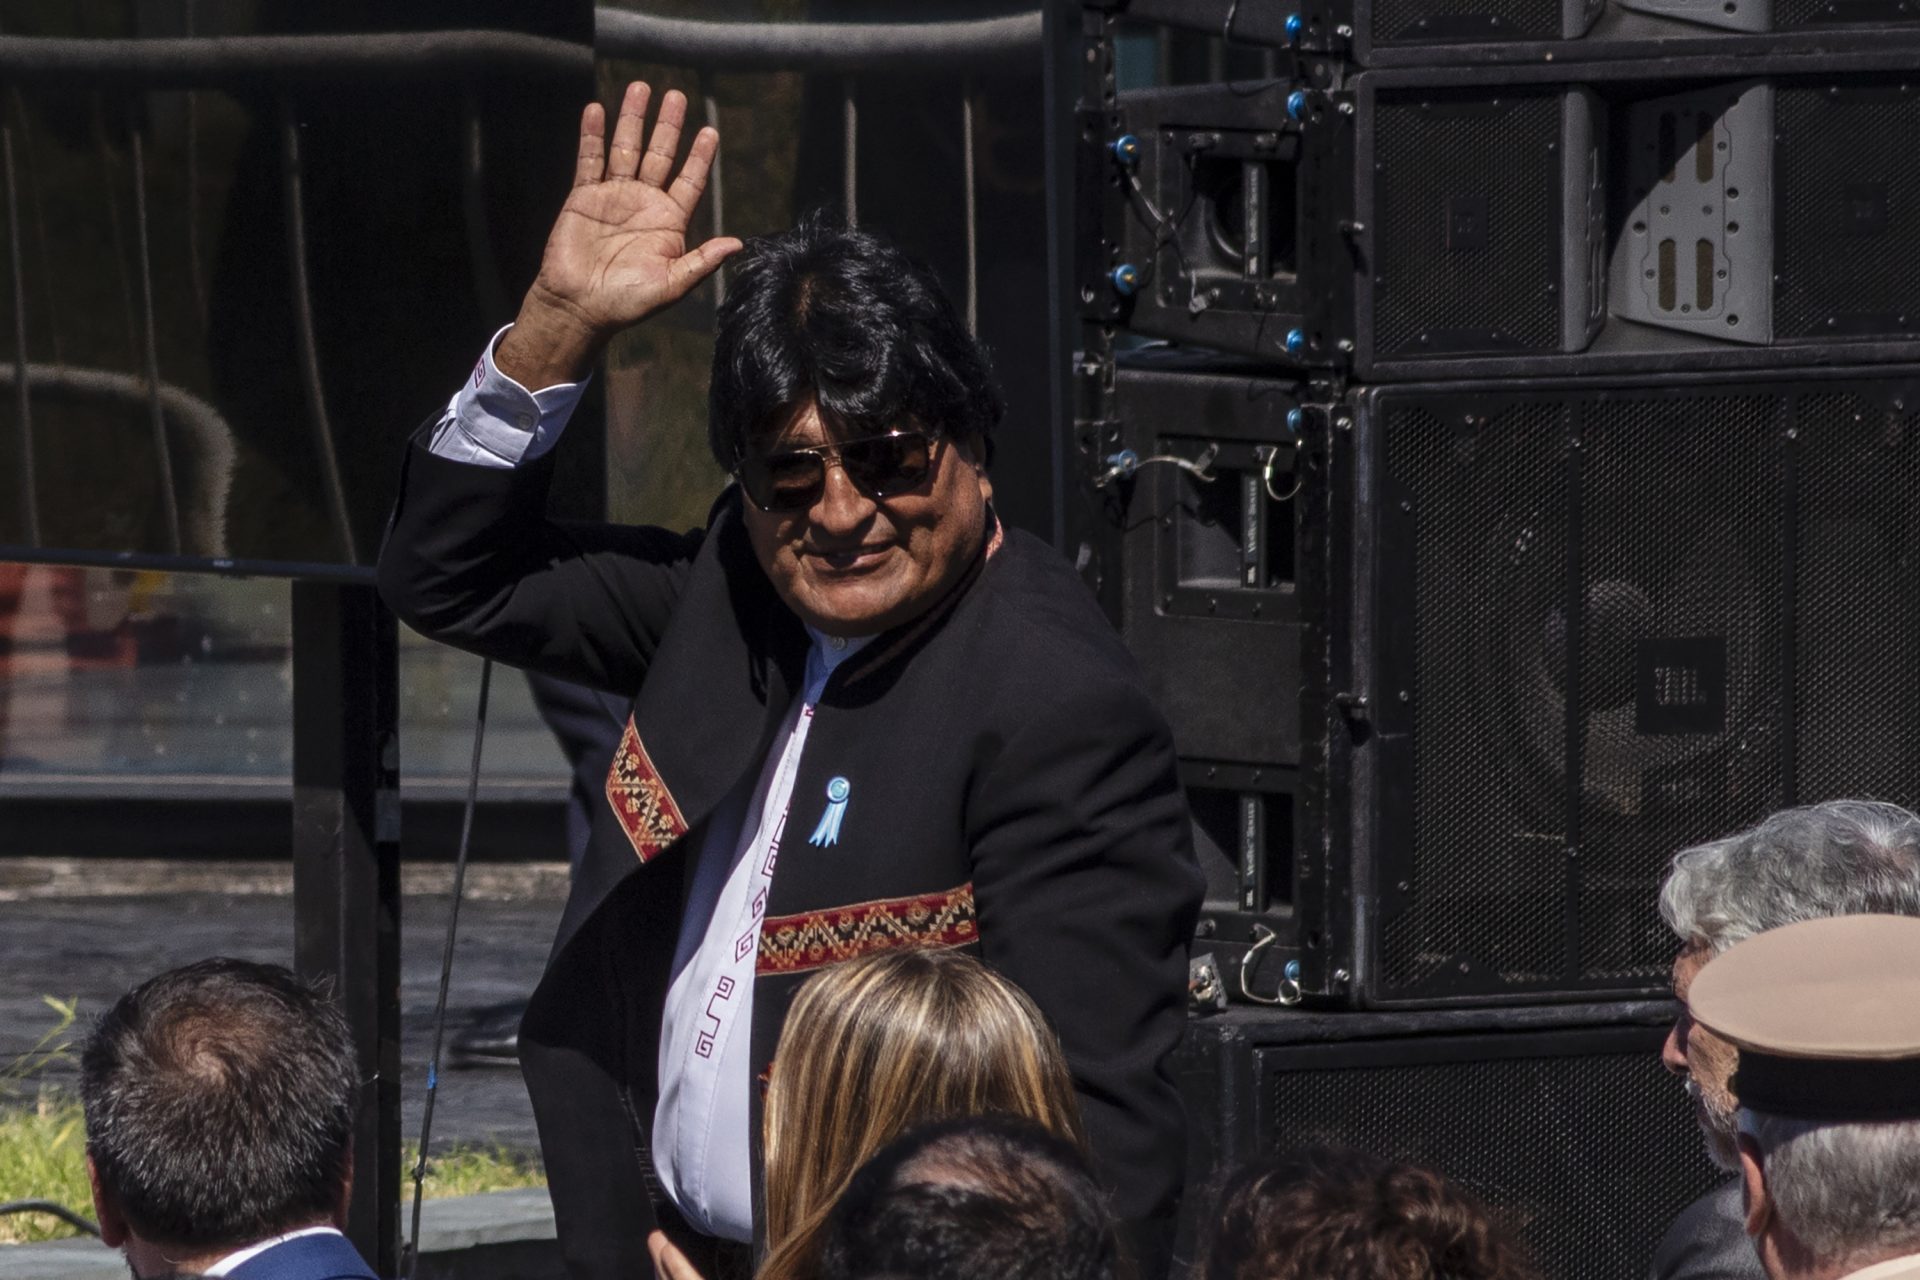 The statements about Evo Morales